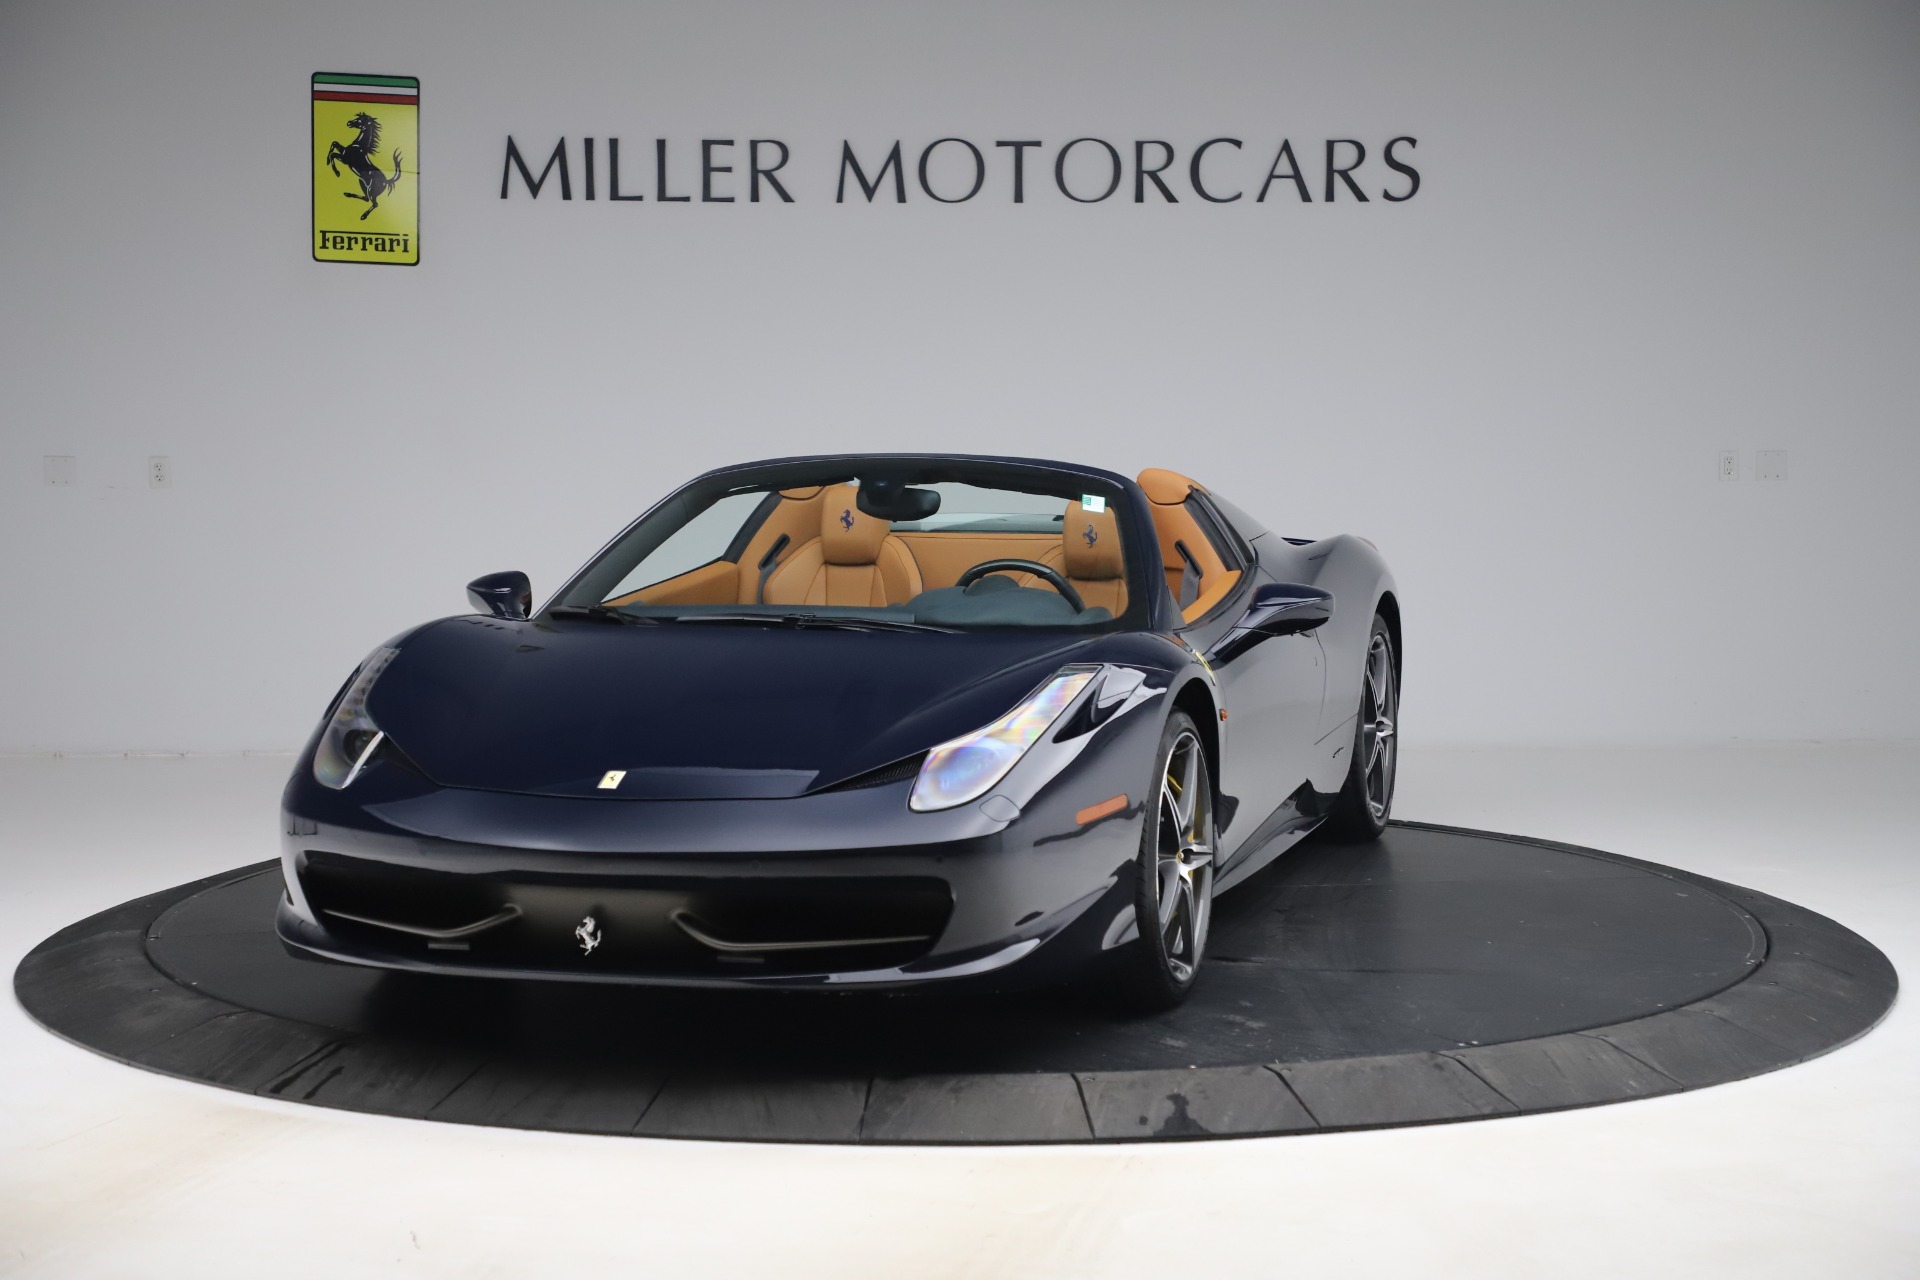 Used 2012 Ferrari 458 Spider for sale Sold at Bentley Greenwich in Greenwich CT 06830 1